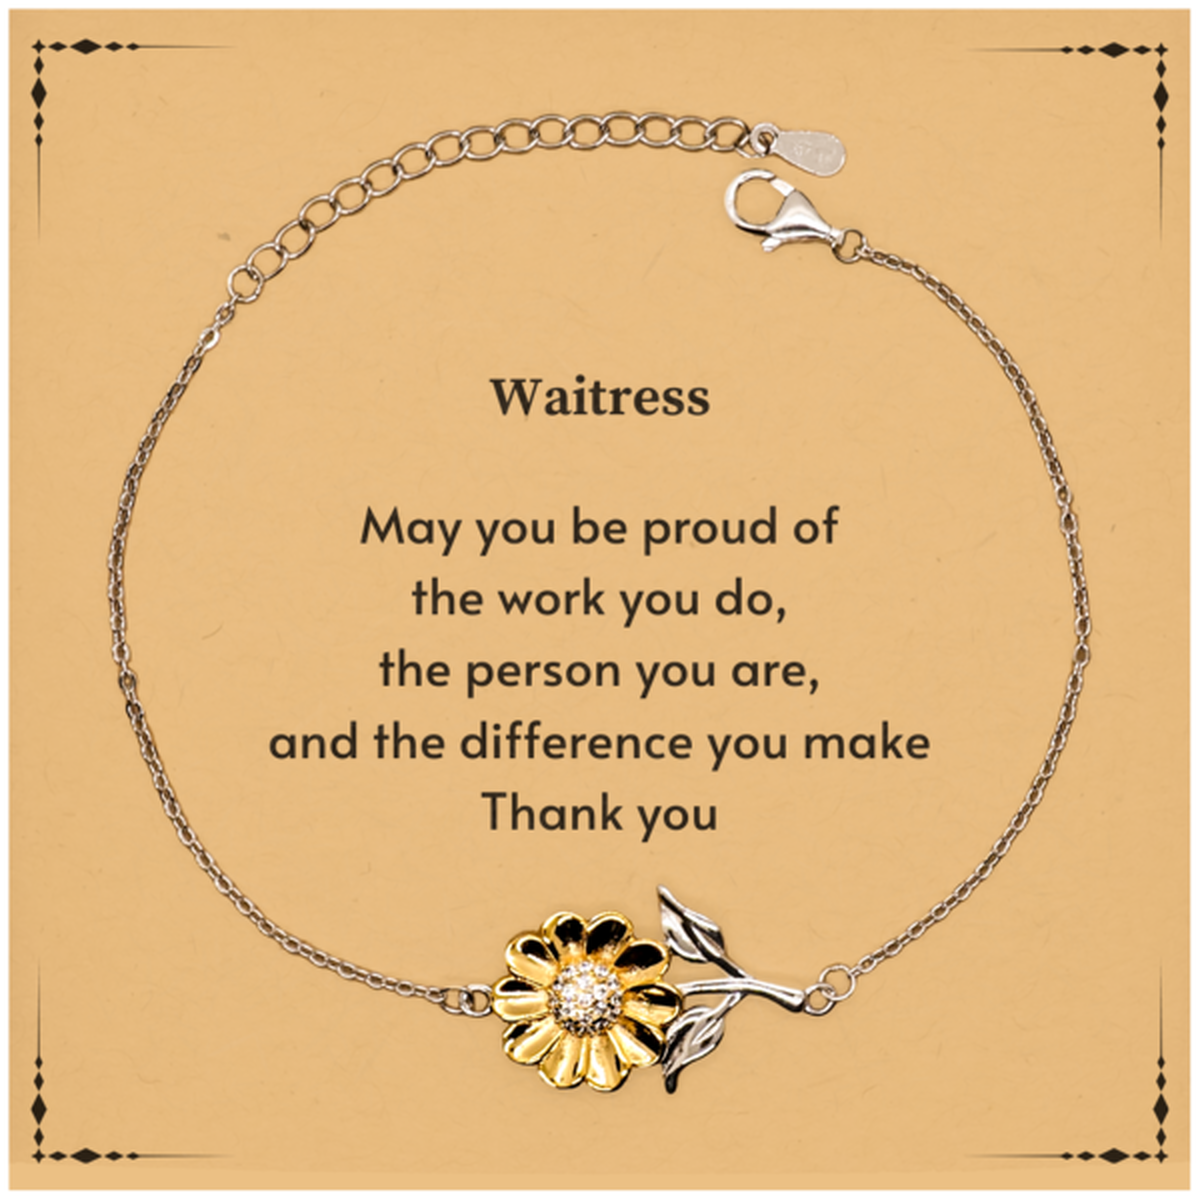 Heartwarming Sunflower Bracelet Retirement Coworkers Gifts for Waitress, Waitress May You be proud of the work you do, the person you are Gifts for Boss Men Women Friends